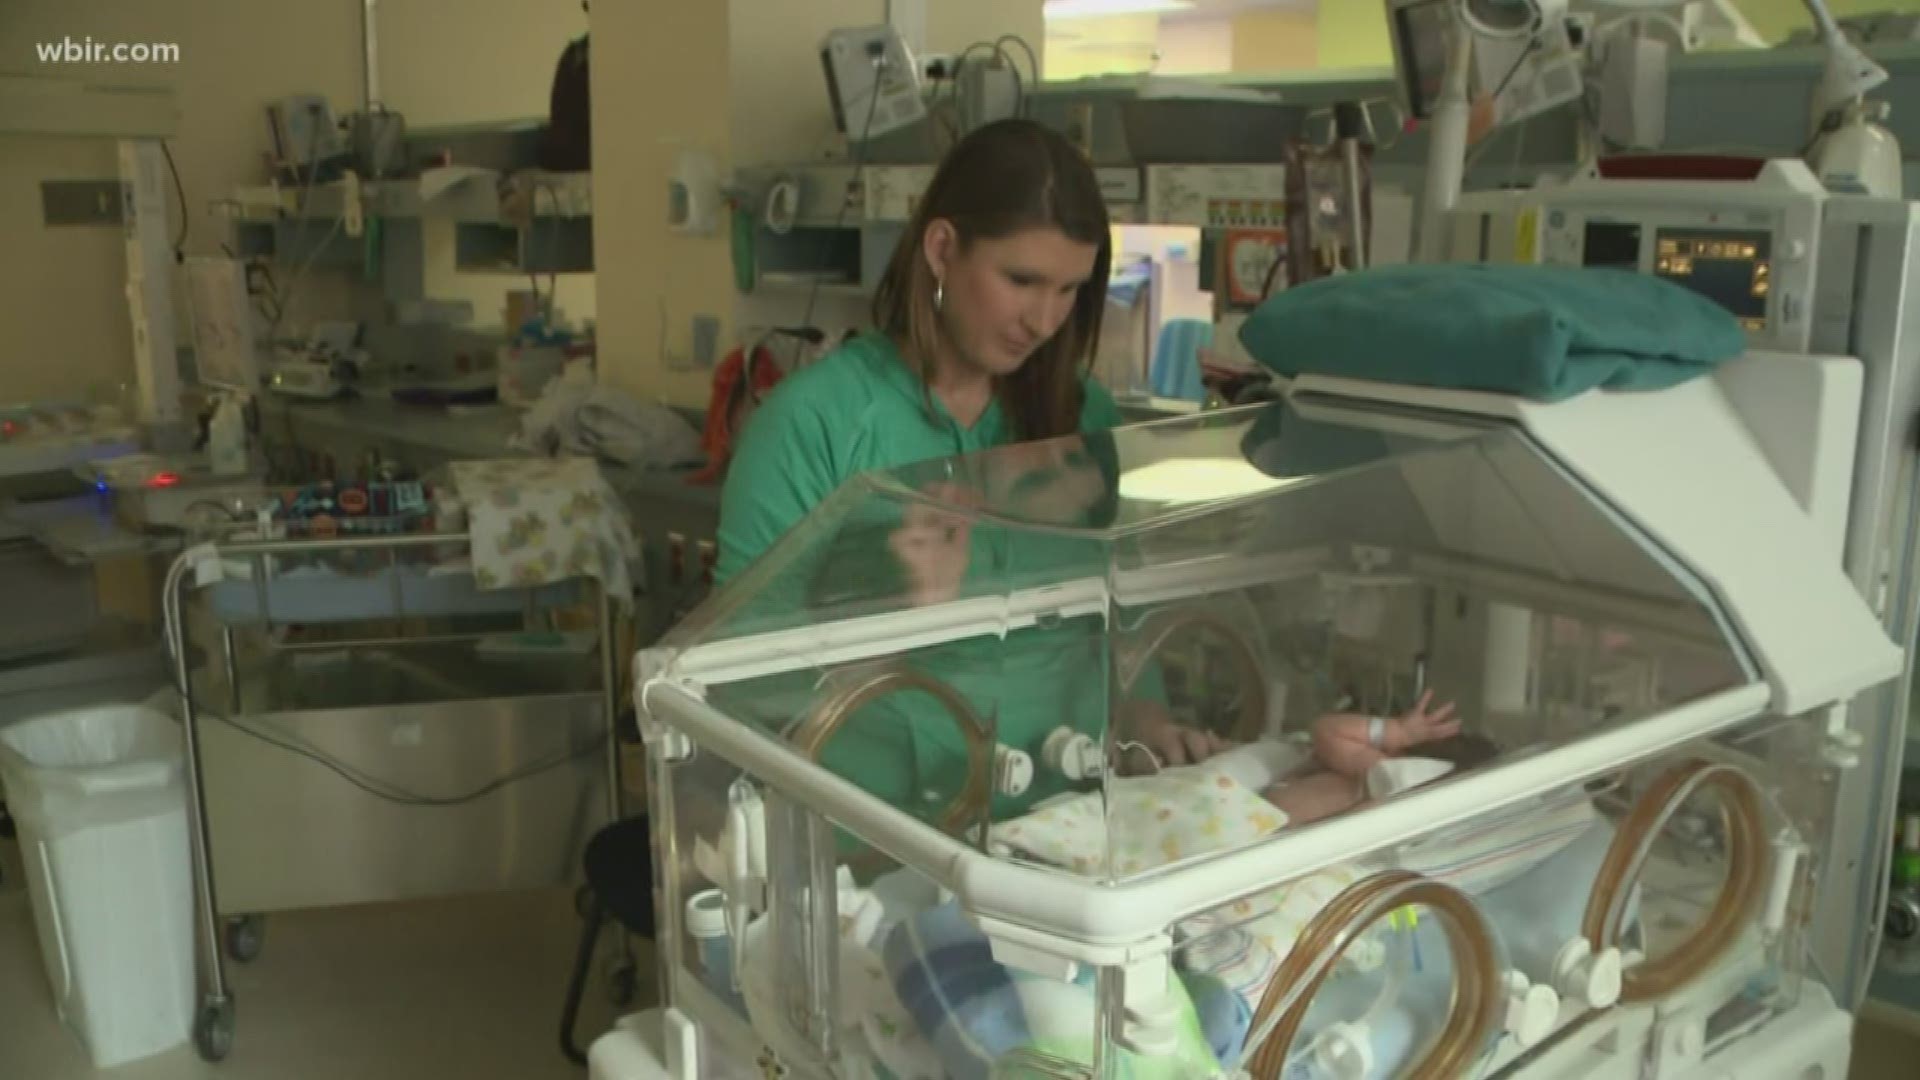 It allows new moms to give back and support others in need, particularly parents of preemies and fragile newborns.